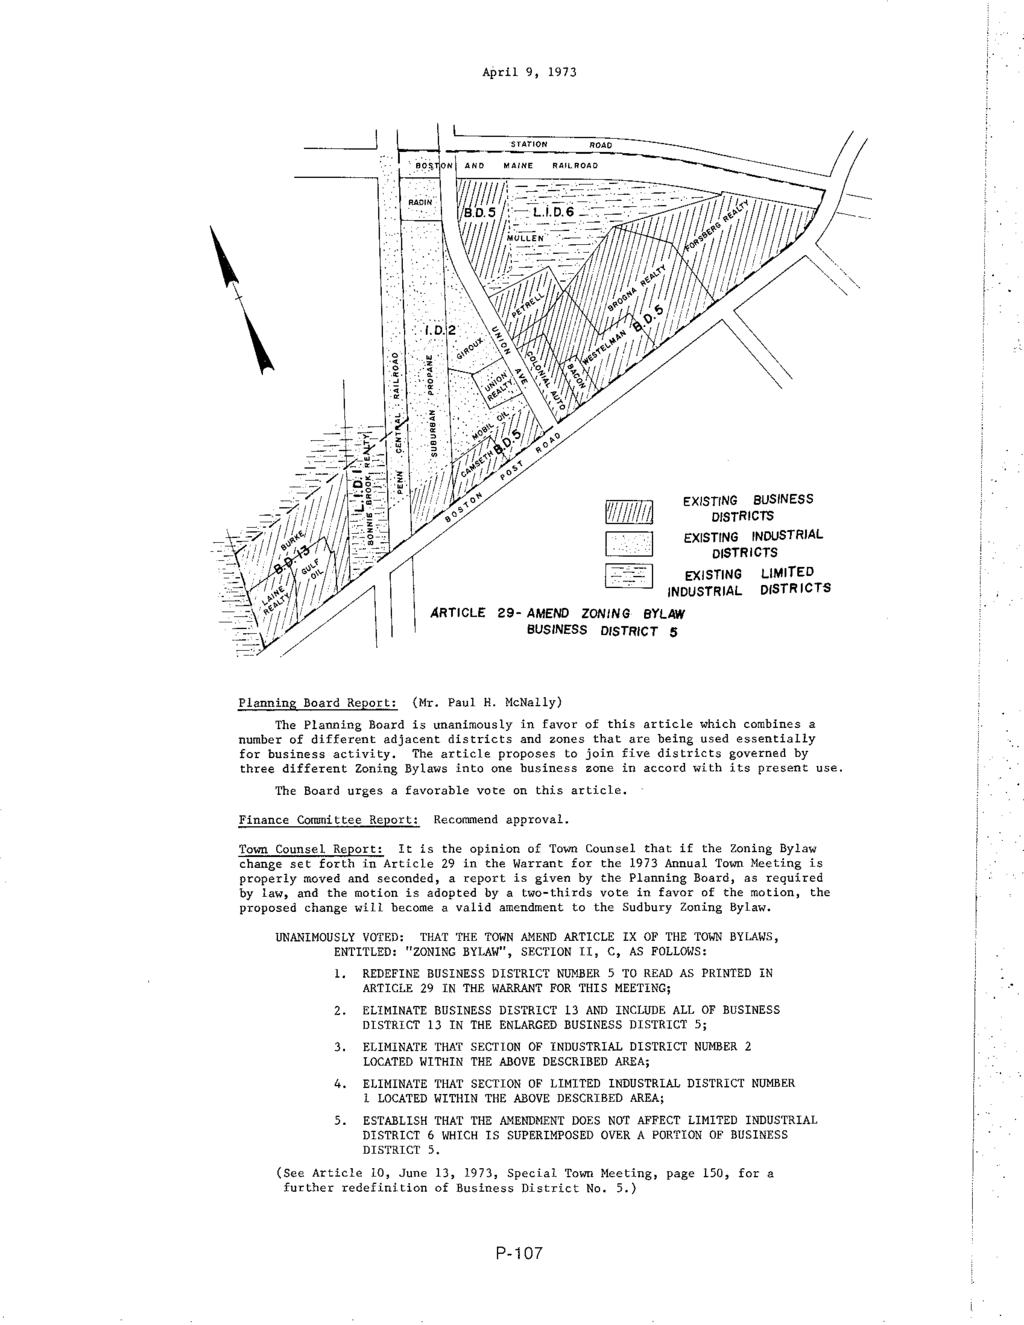 APril 9, 1973 ARTICLE 29- AMEND ZONING BYLAW BUSINESS DISTRICT 5 EXISTING BUSINESS DISTRICTS EXISTING INDUSTRIAL DISTRICTS EXISTING INDUSTRIAL LIMITED DISTRICTS Planning Board Report: (Mr. Paul H.